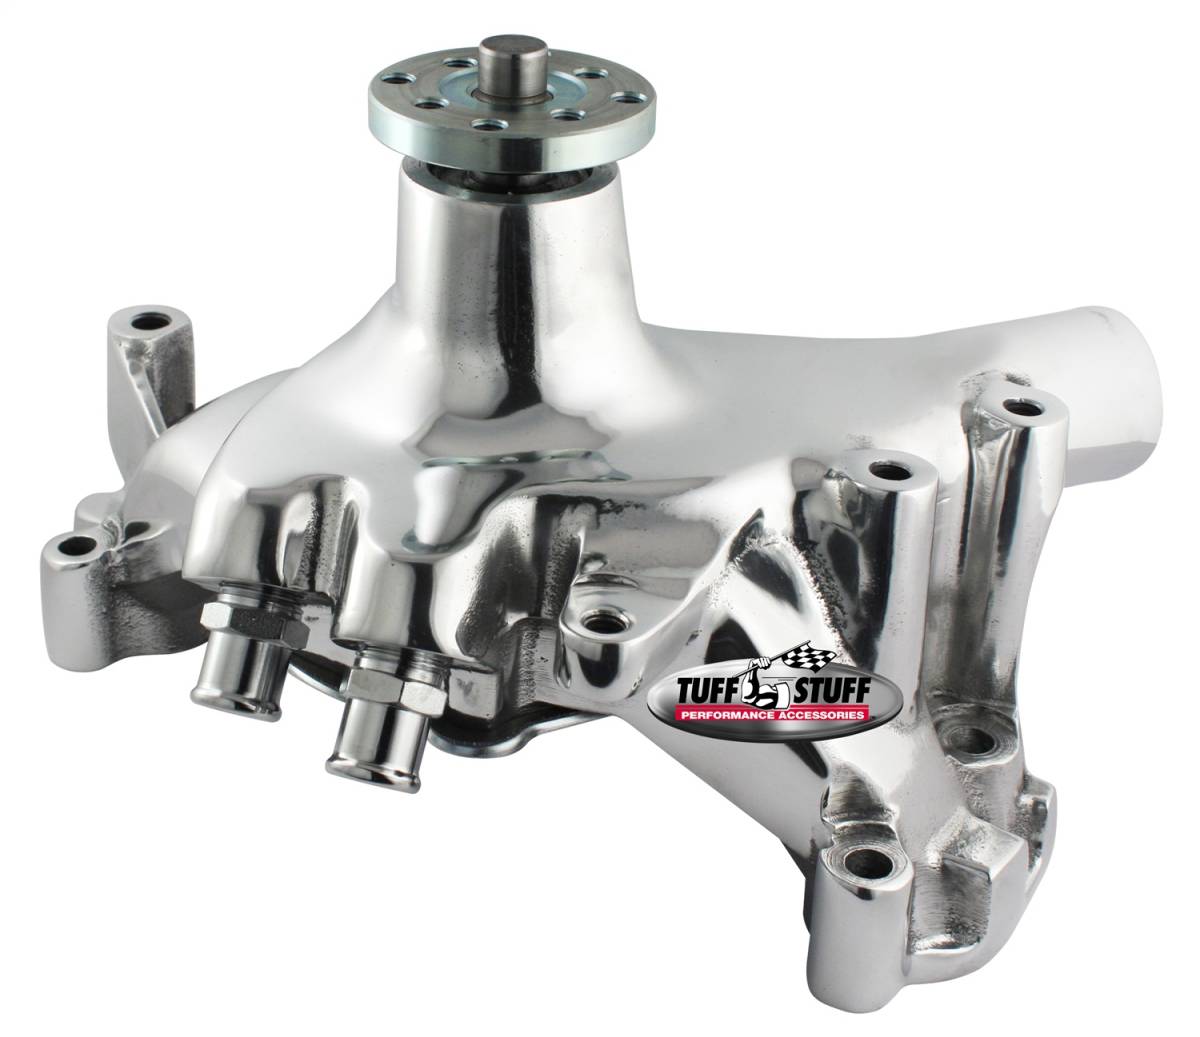 Tuff Stuff Performance - Platinum SuperCool Water Pump 7.281 in. Hub Height 5/8 in. Pilot Long (2) Threaded Water Ports Aluminum Casting Polished 1461AB